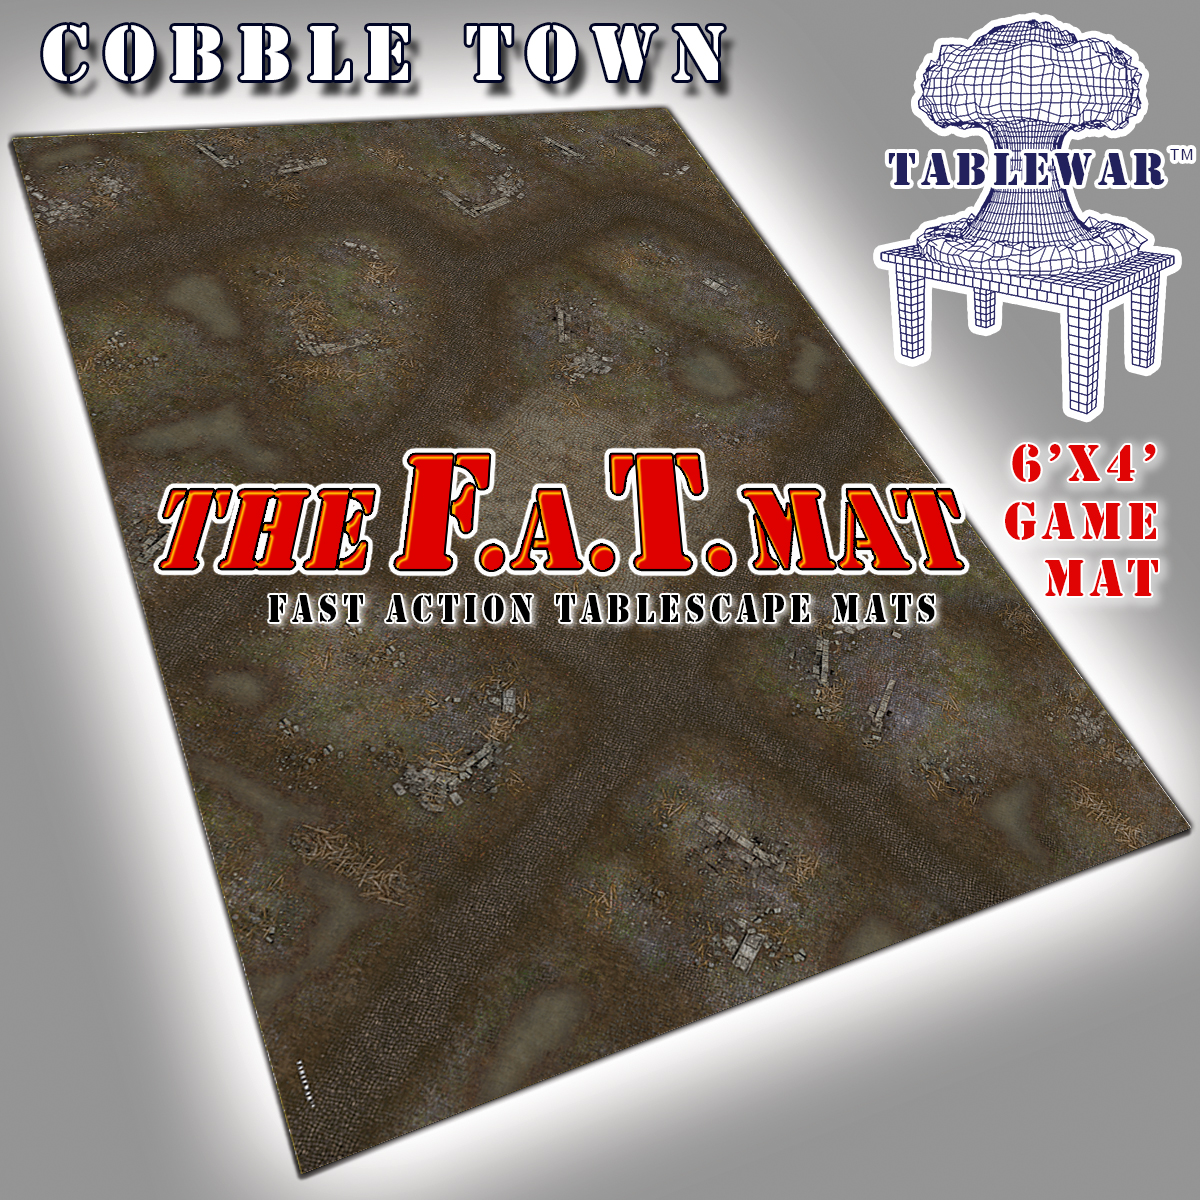 TABLEWAR F.A.T. Mats – New Cobble Town Designs up for pre-order!